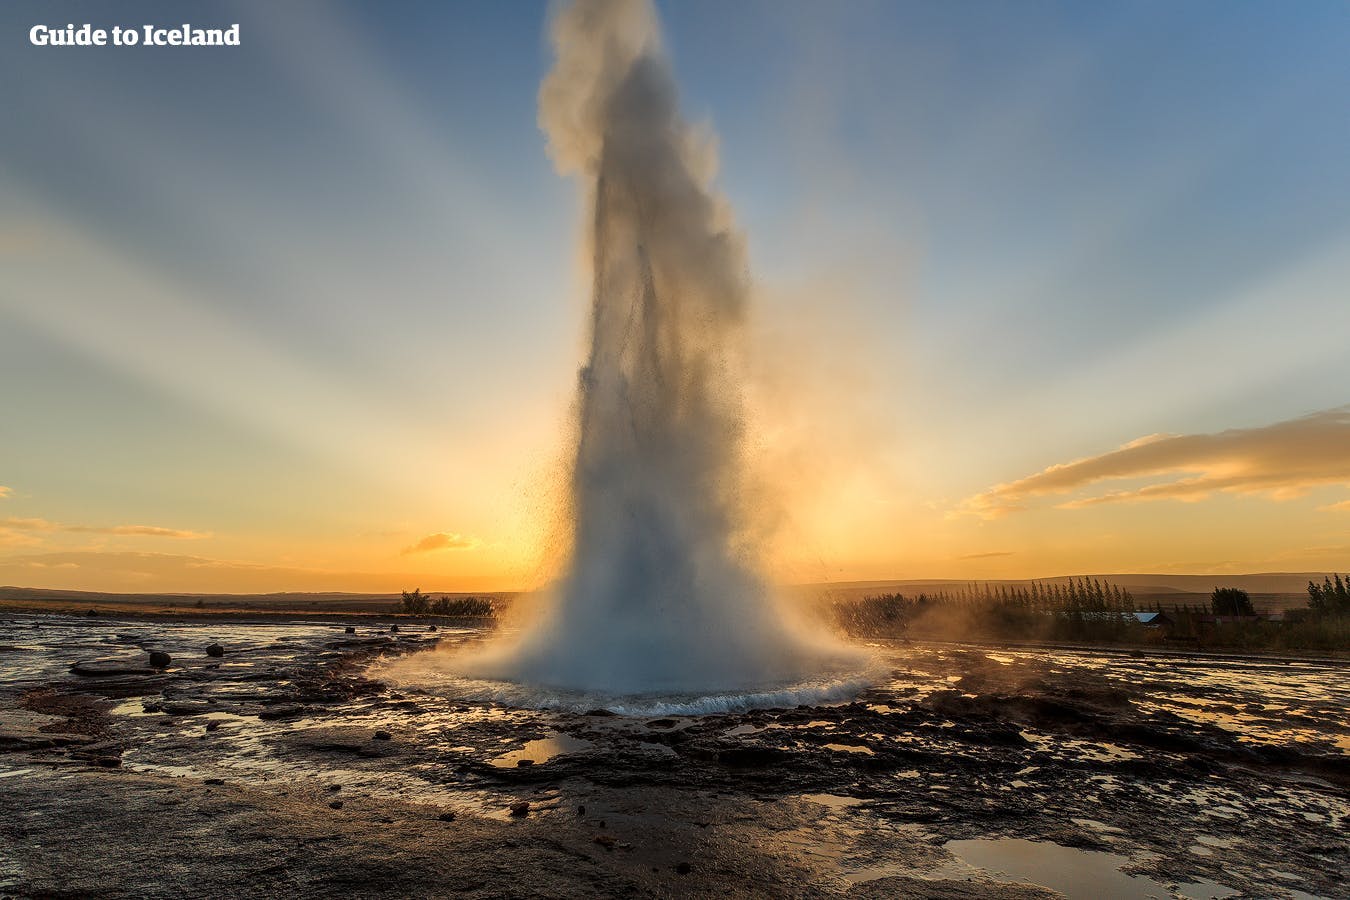 Watch the mighty Strokkur geyser shoot boiling water high up into the air on the Golden Circle sightseeing route.